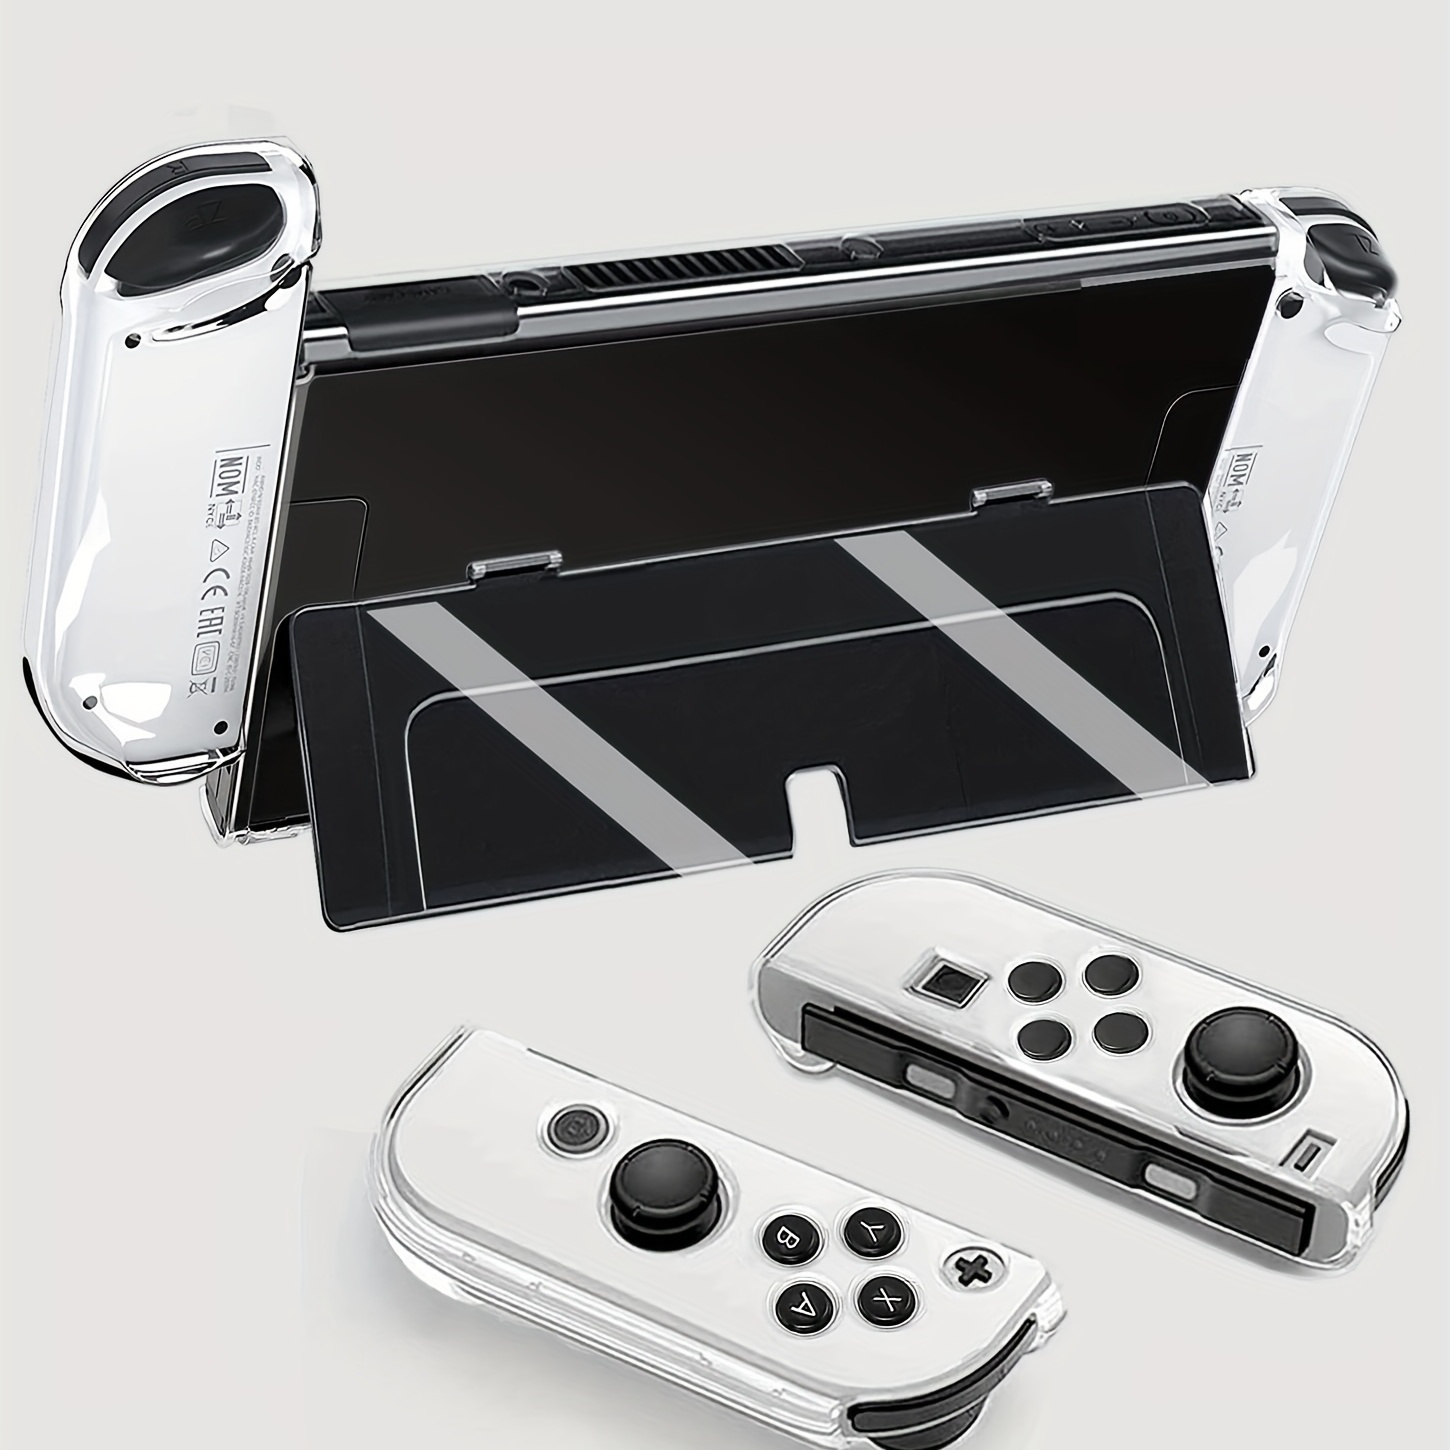 Protective Case Bundle for Nintendo Switch Lite, Tempered Glass Screen  Protector, 4 Game Card Slots, Kick-Stand, Ergonomics Hand Grip, Shockproof